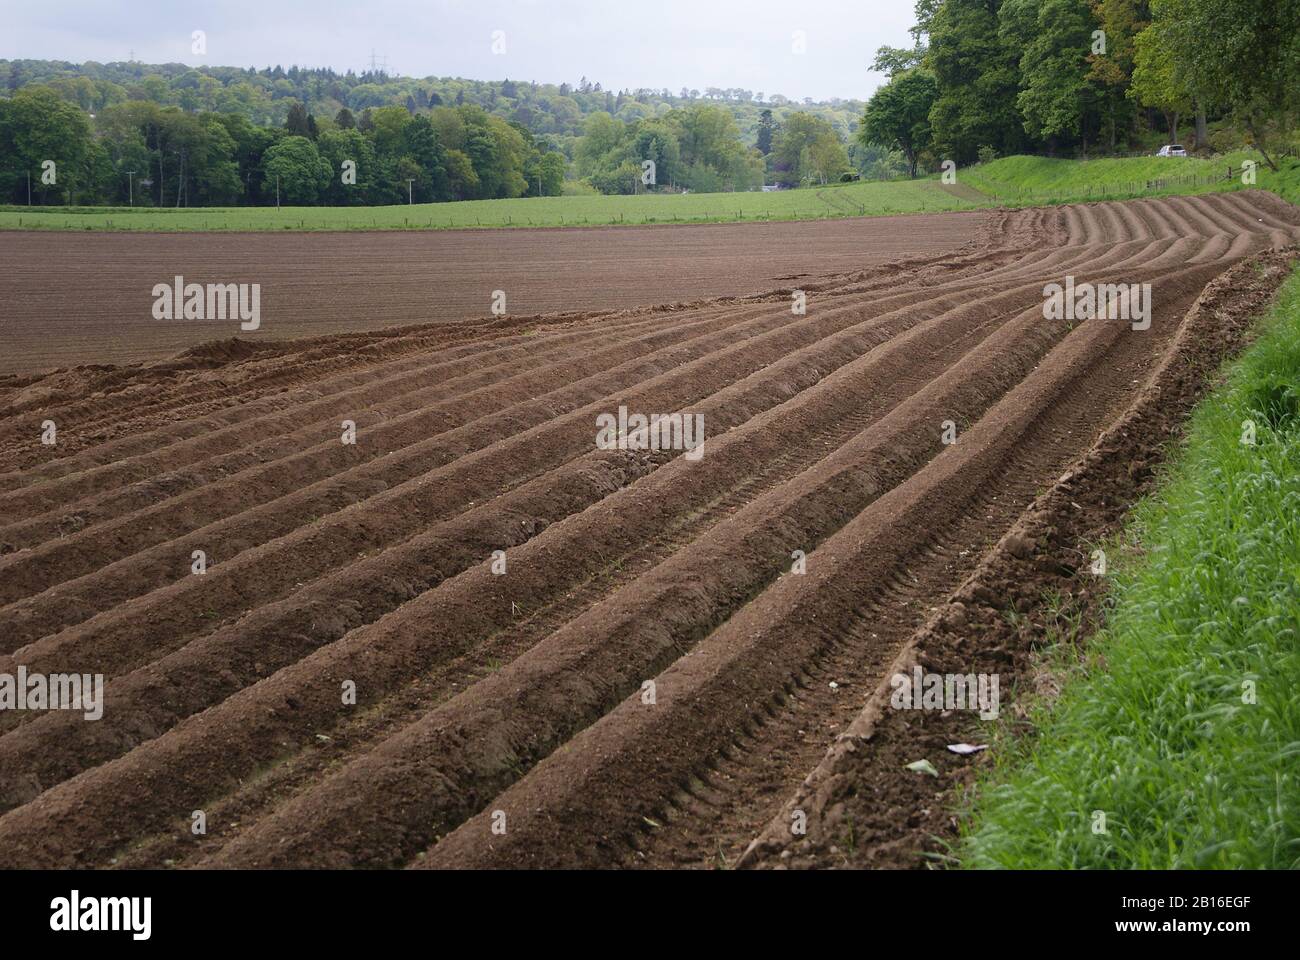 Furrows of a farmers ploughed field showing the brown earth and with trees in the background Stock Photo